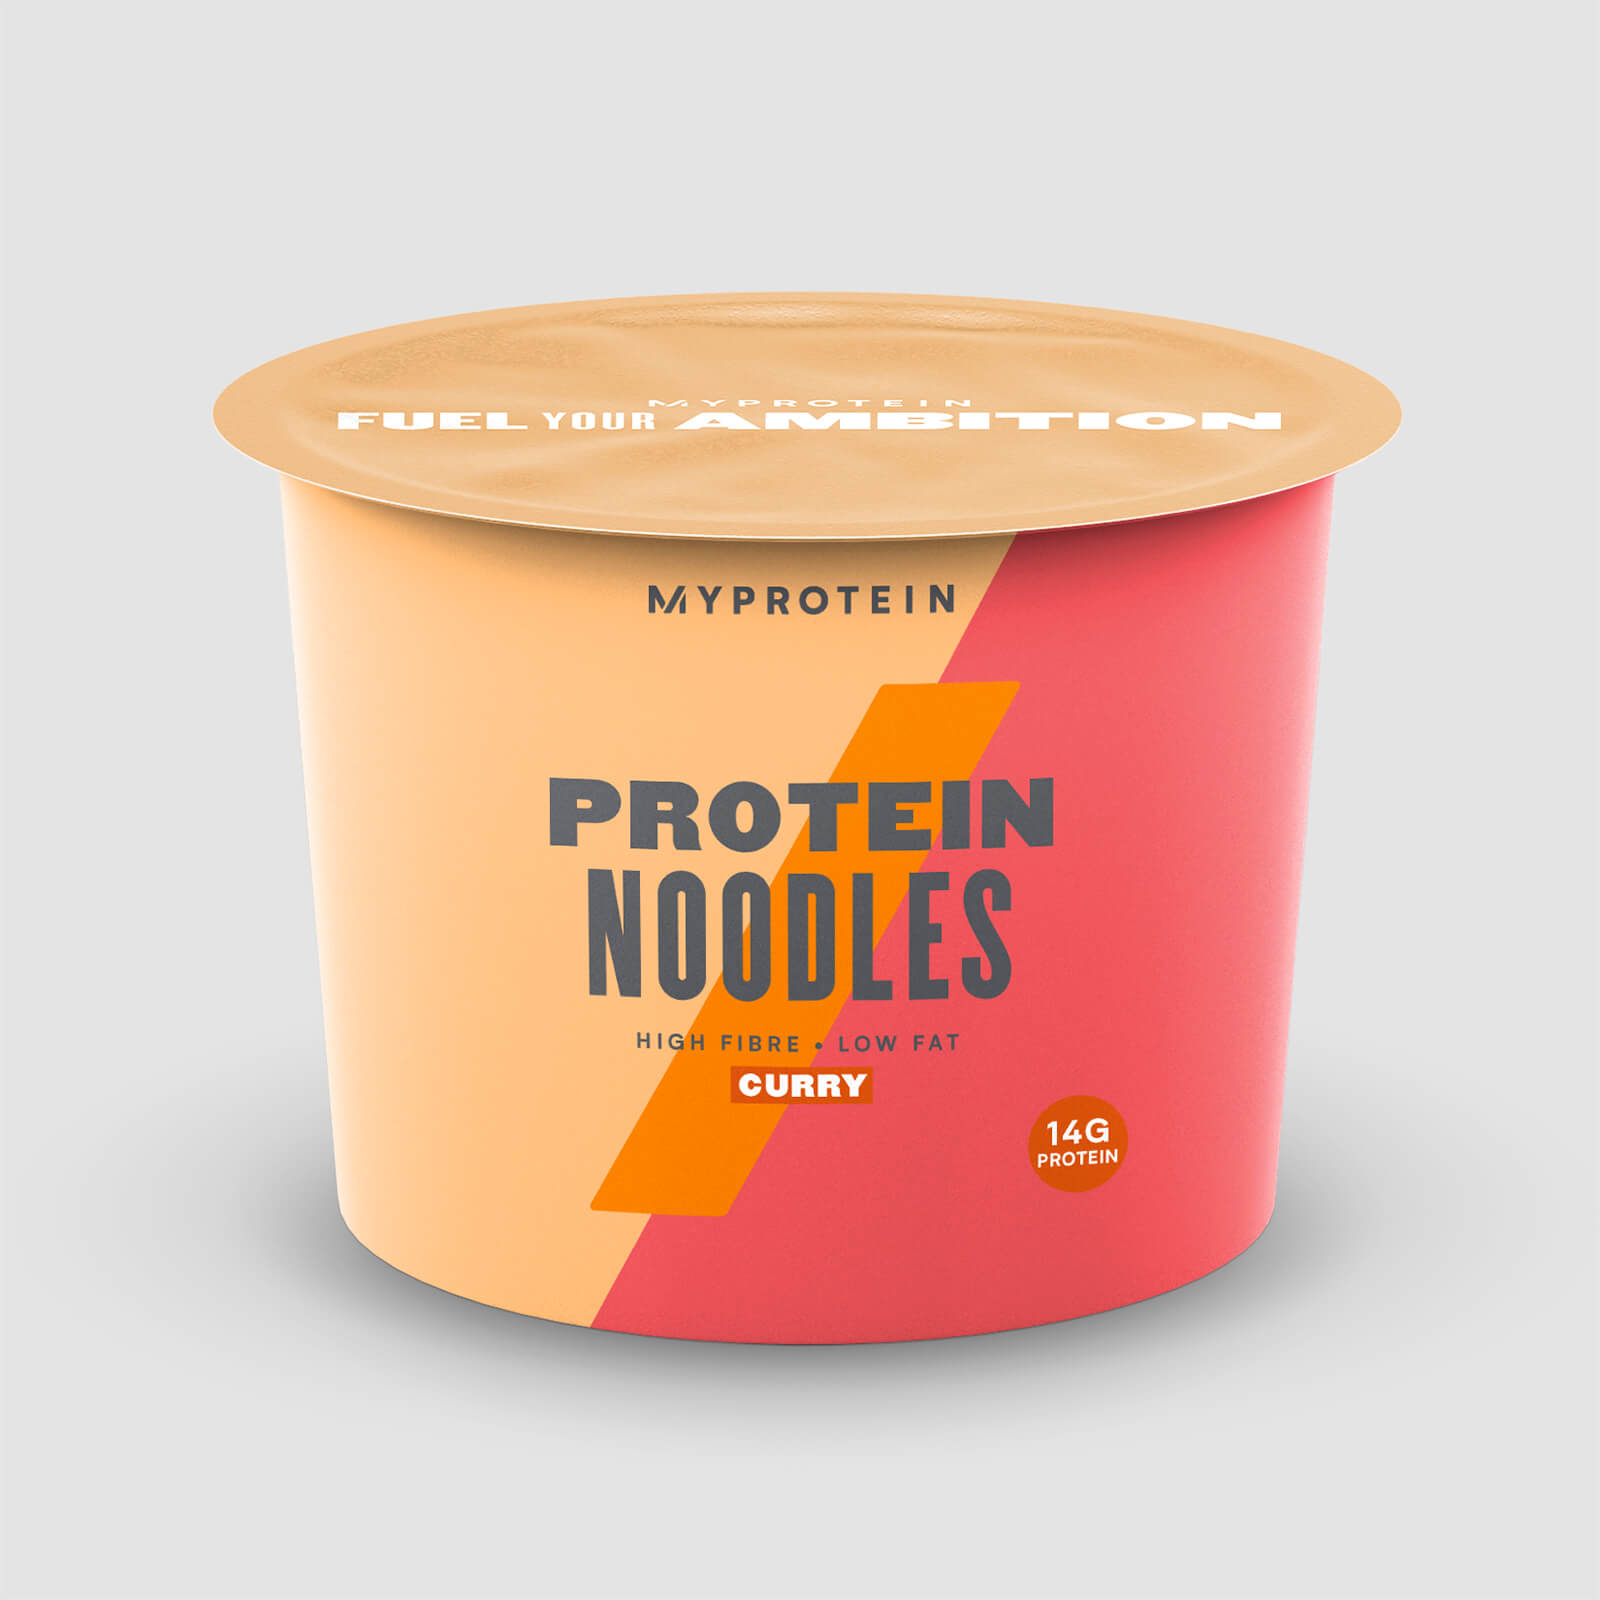 Myprotein Protein Noodle Snack Pot - 6 x 68g - Curry